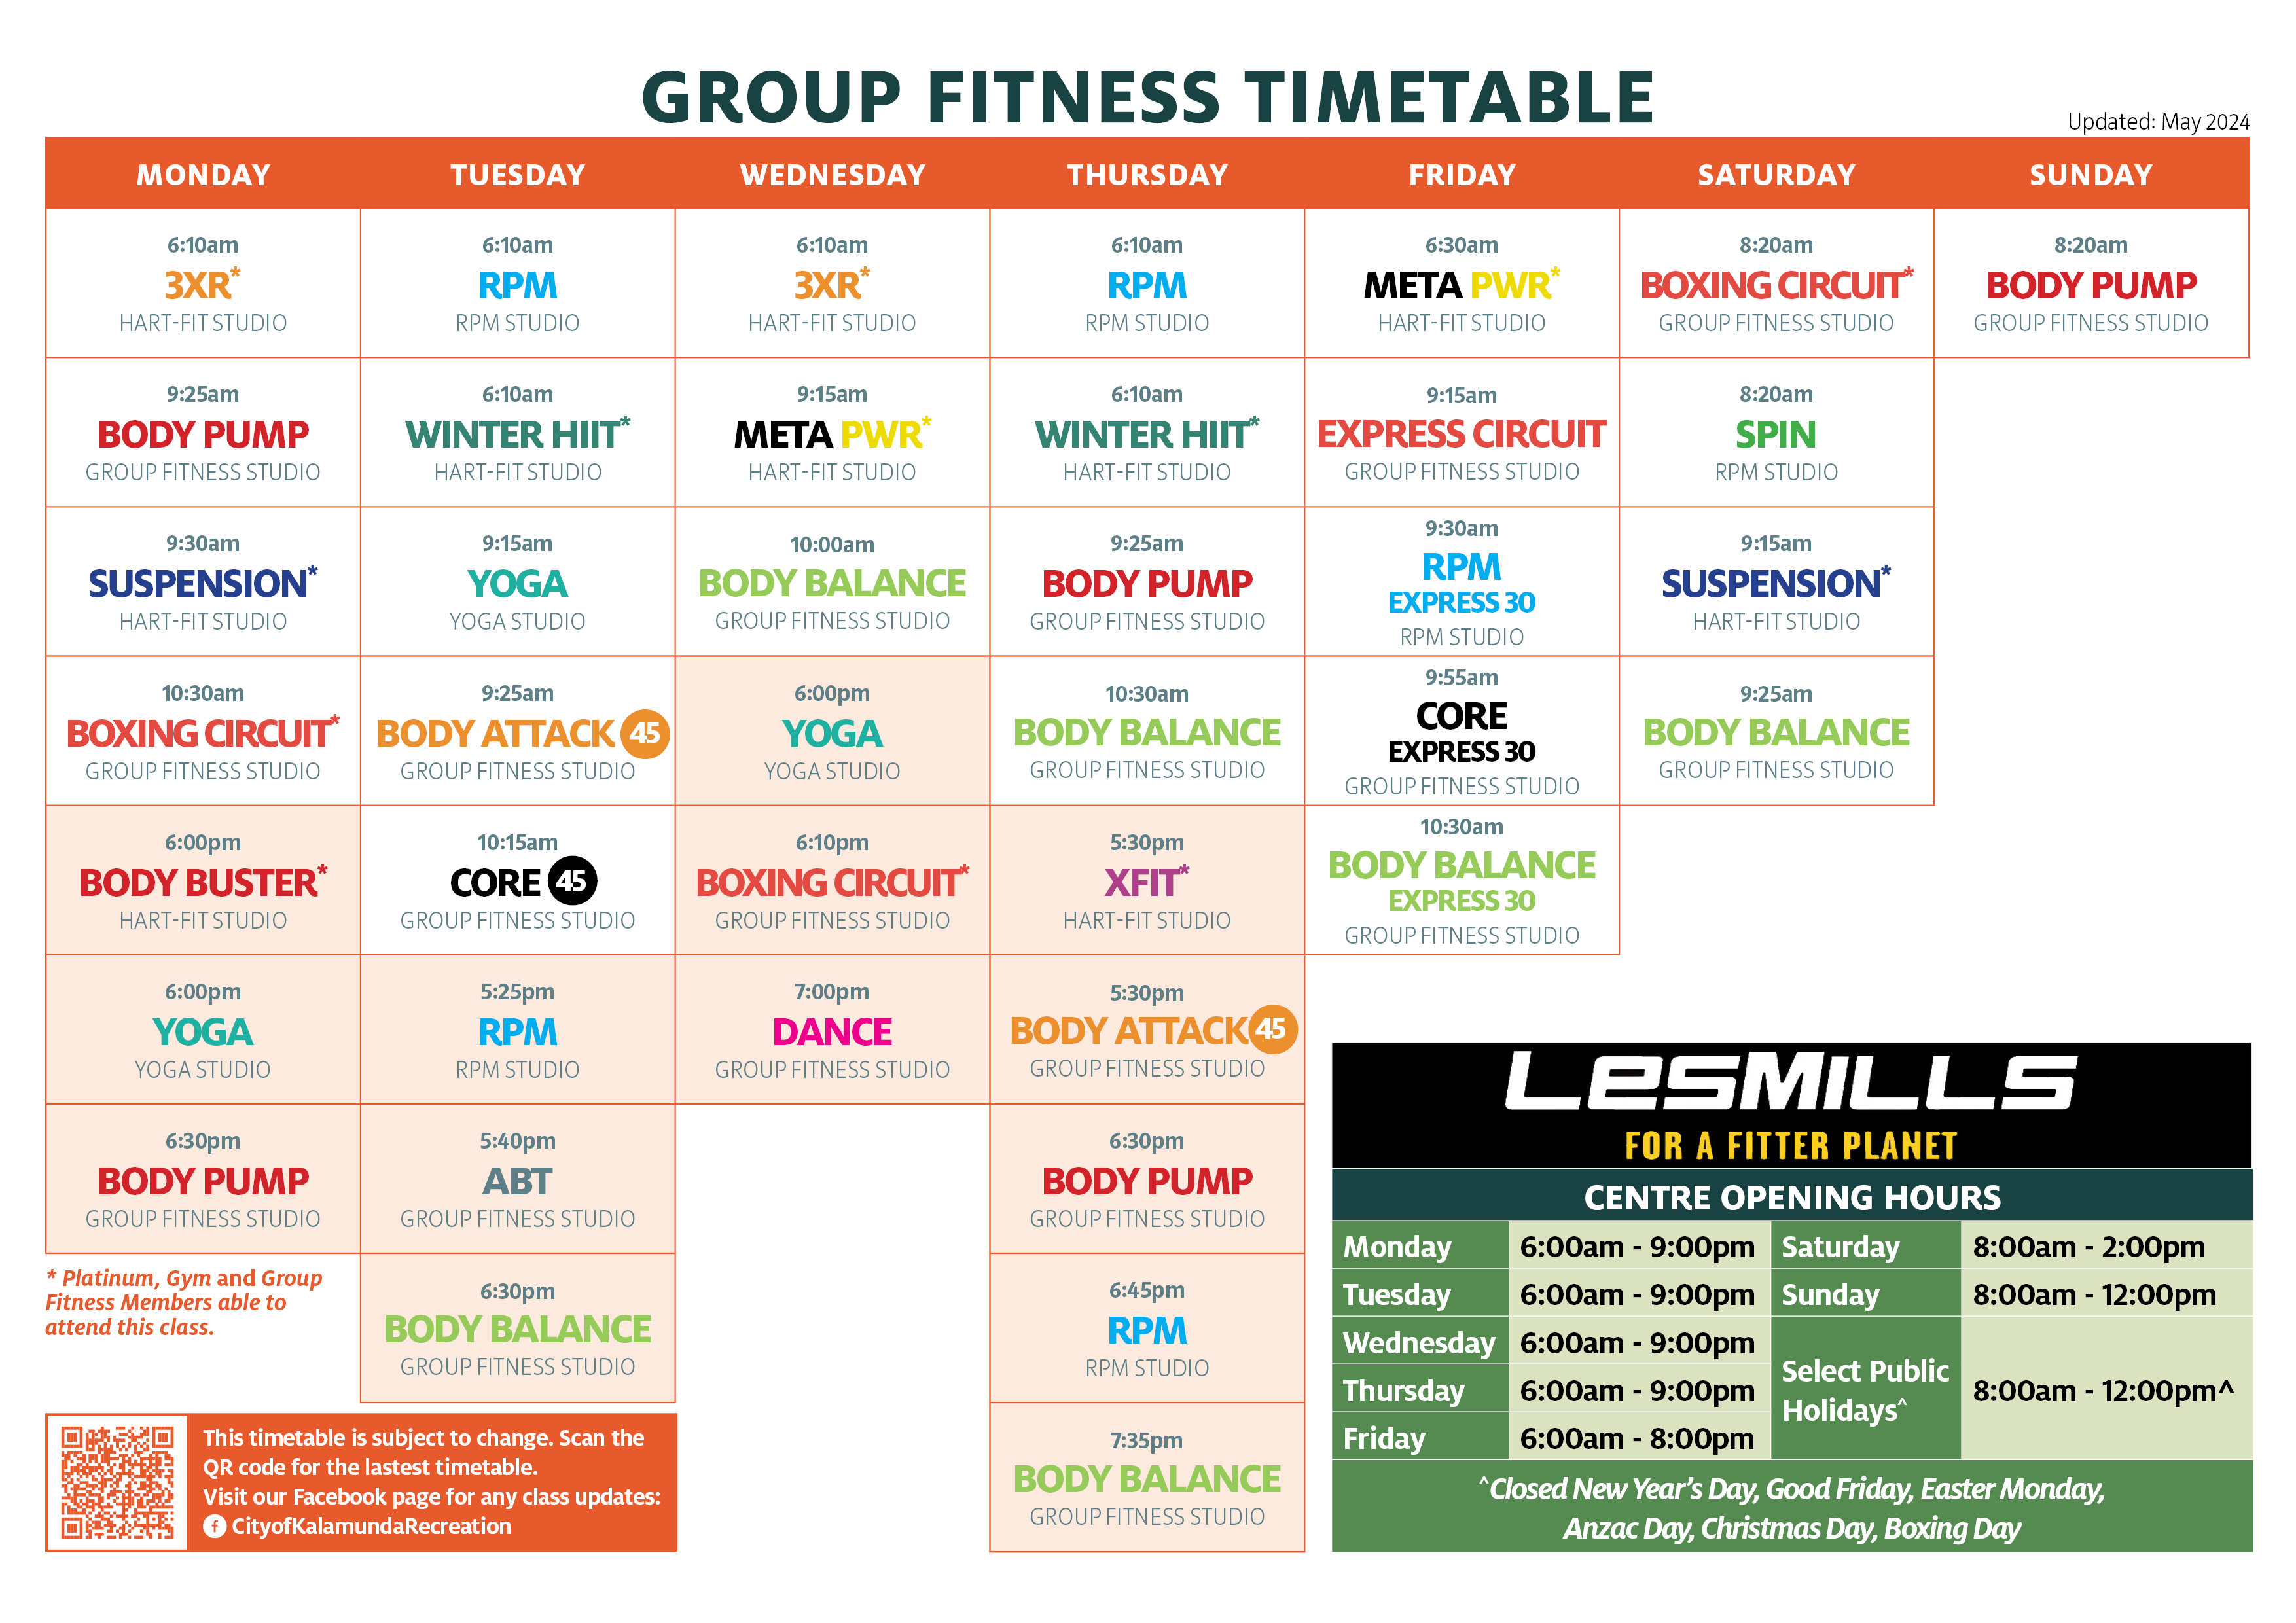 Group Fitness Timetable (as of May 2024)